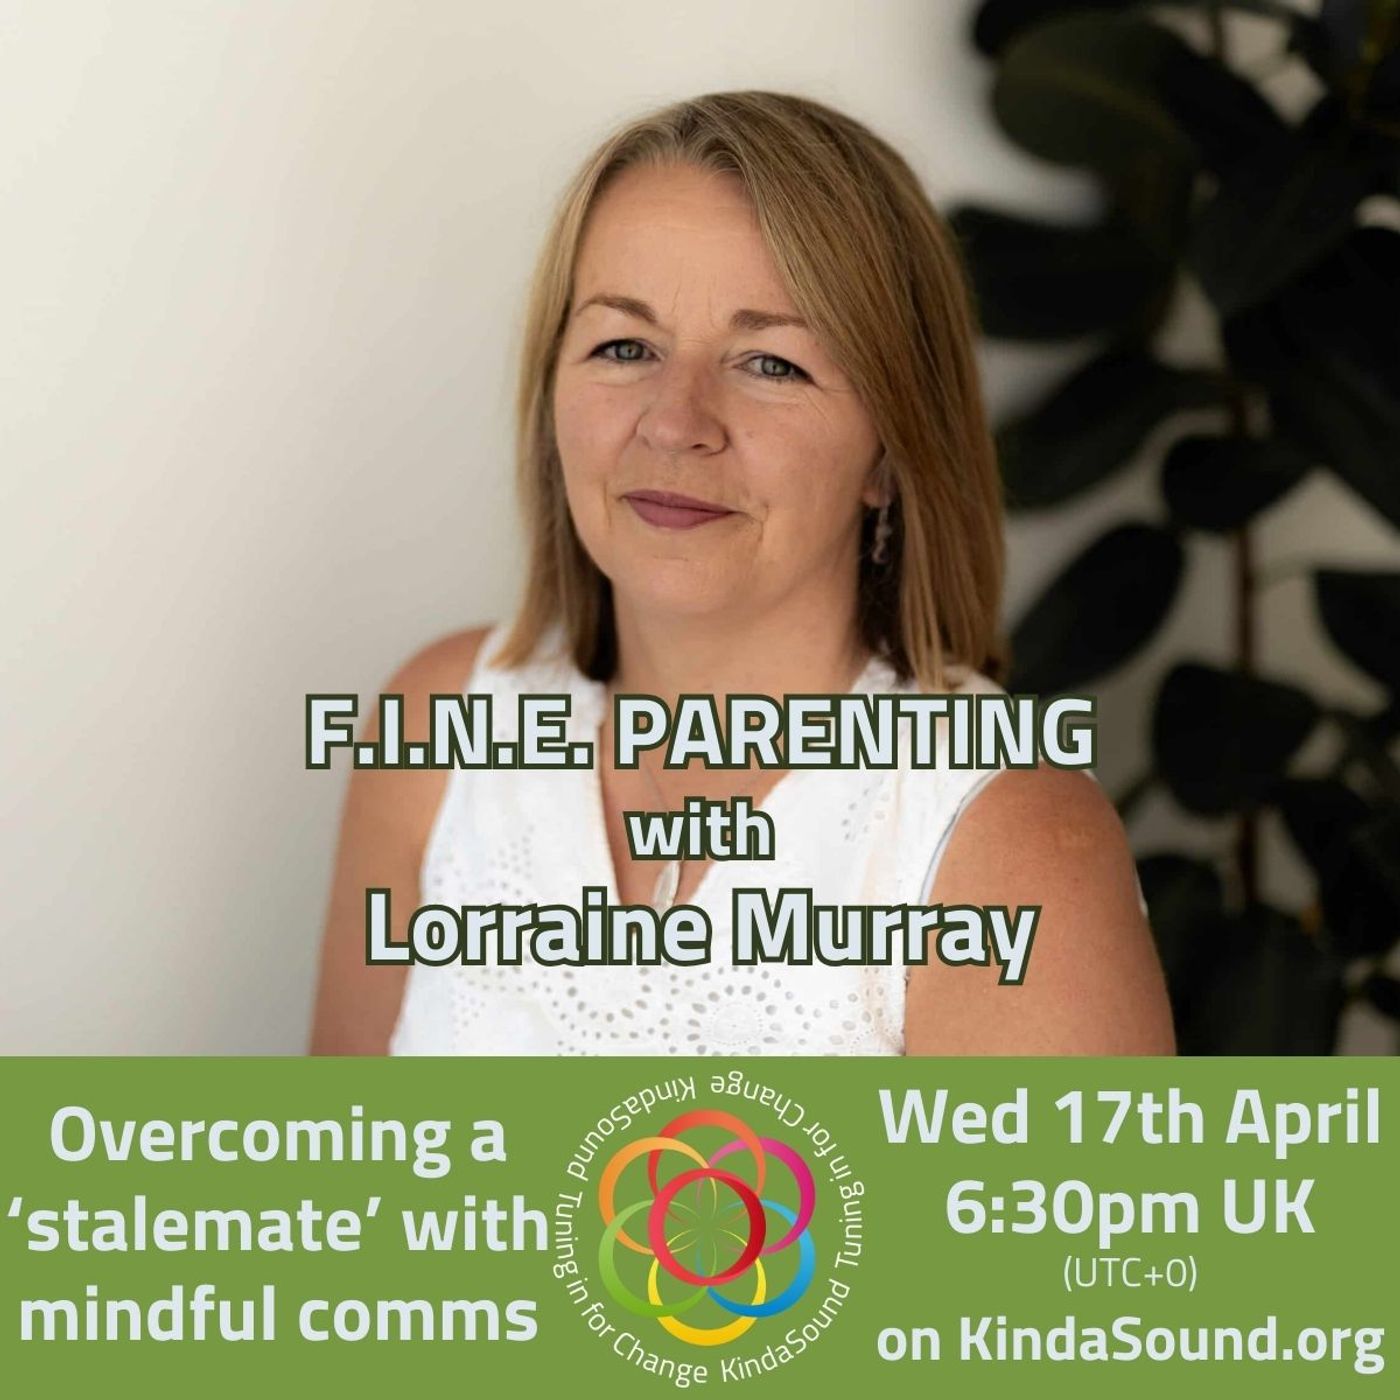 Overcoming a Stalemate with Mindful Comms | F.I.N.E. Parenting with Lorraine E Murray